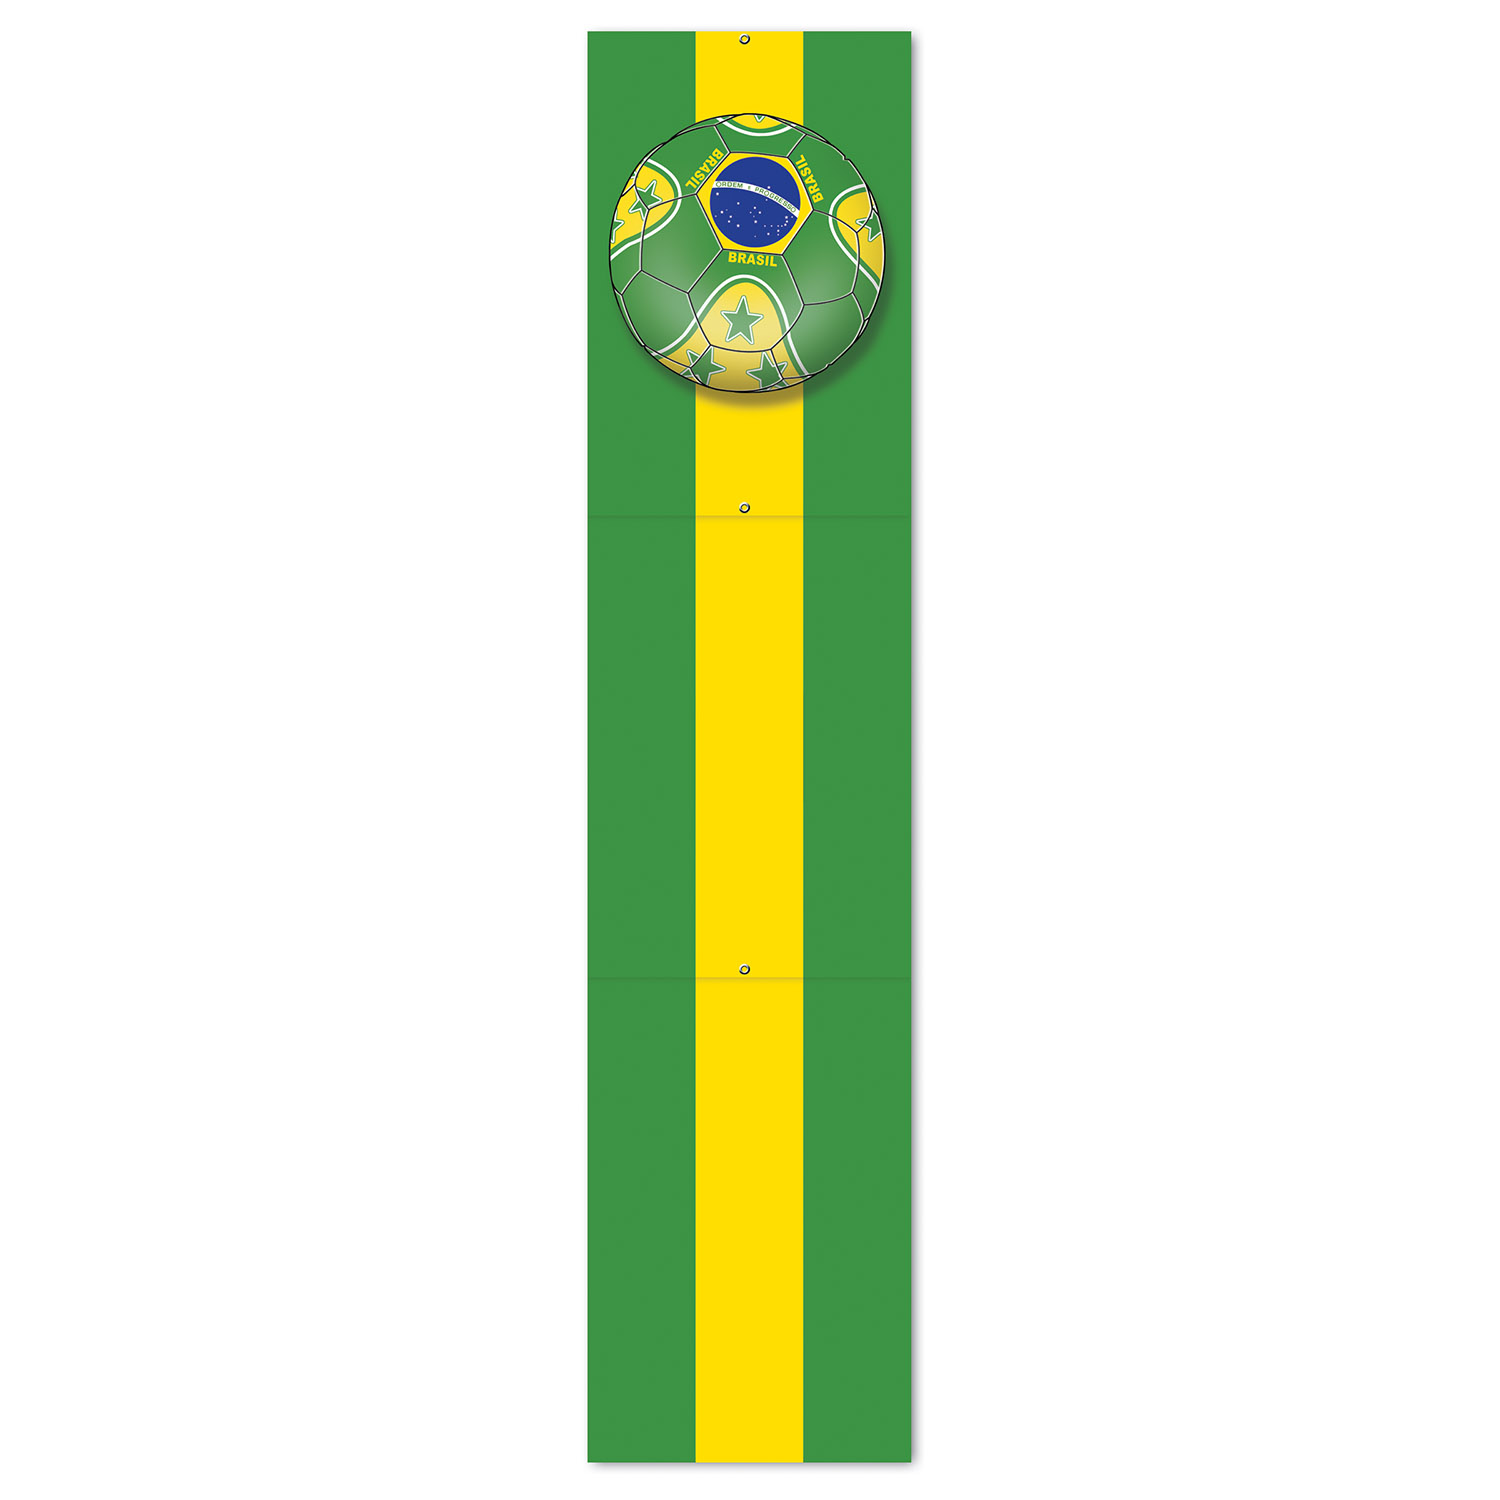 12 Wholesale Jointed Pull-Down Cutout - Brasil